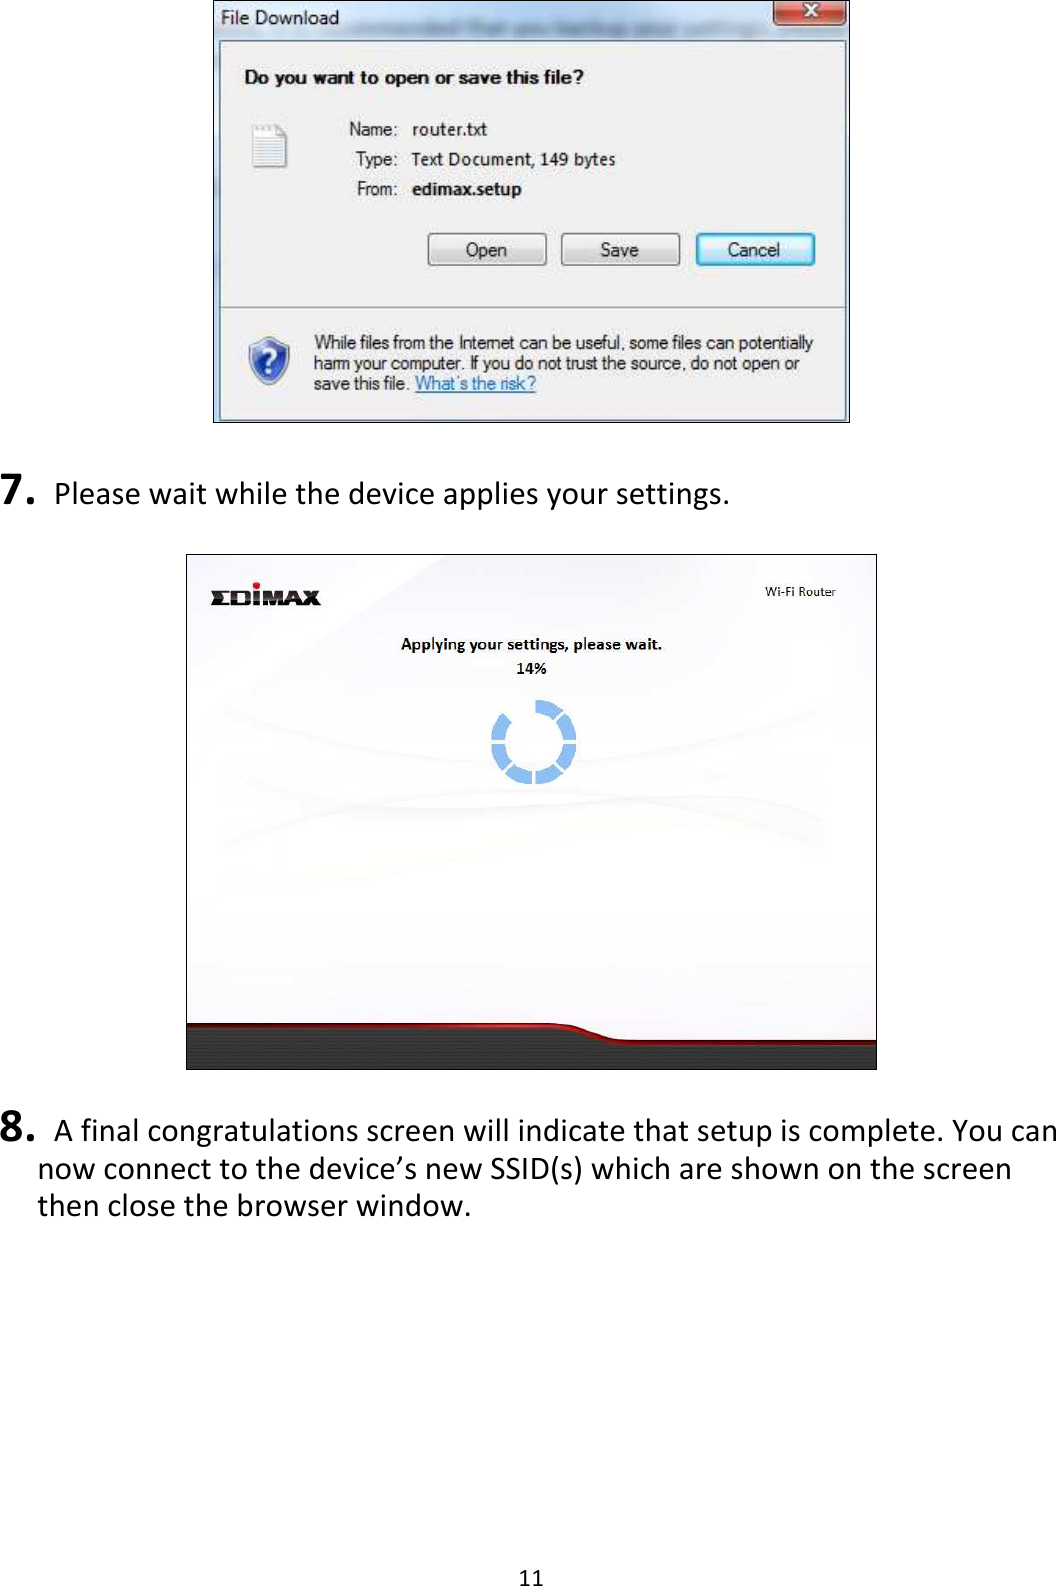 11   7.   Please wait while the device applies your settings.    8.  A final congratulations screen will indicate that setup is complete. You can now connect to the device’s new SSID(s) which are shown on the screen then close the browser window.  